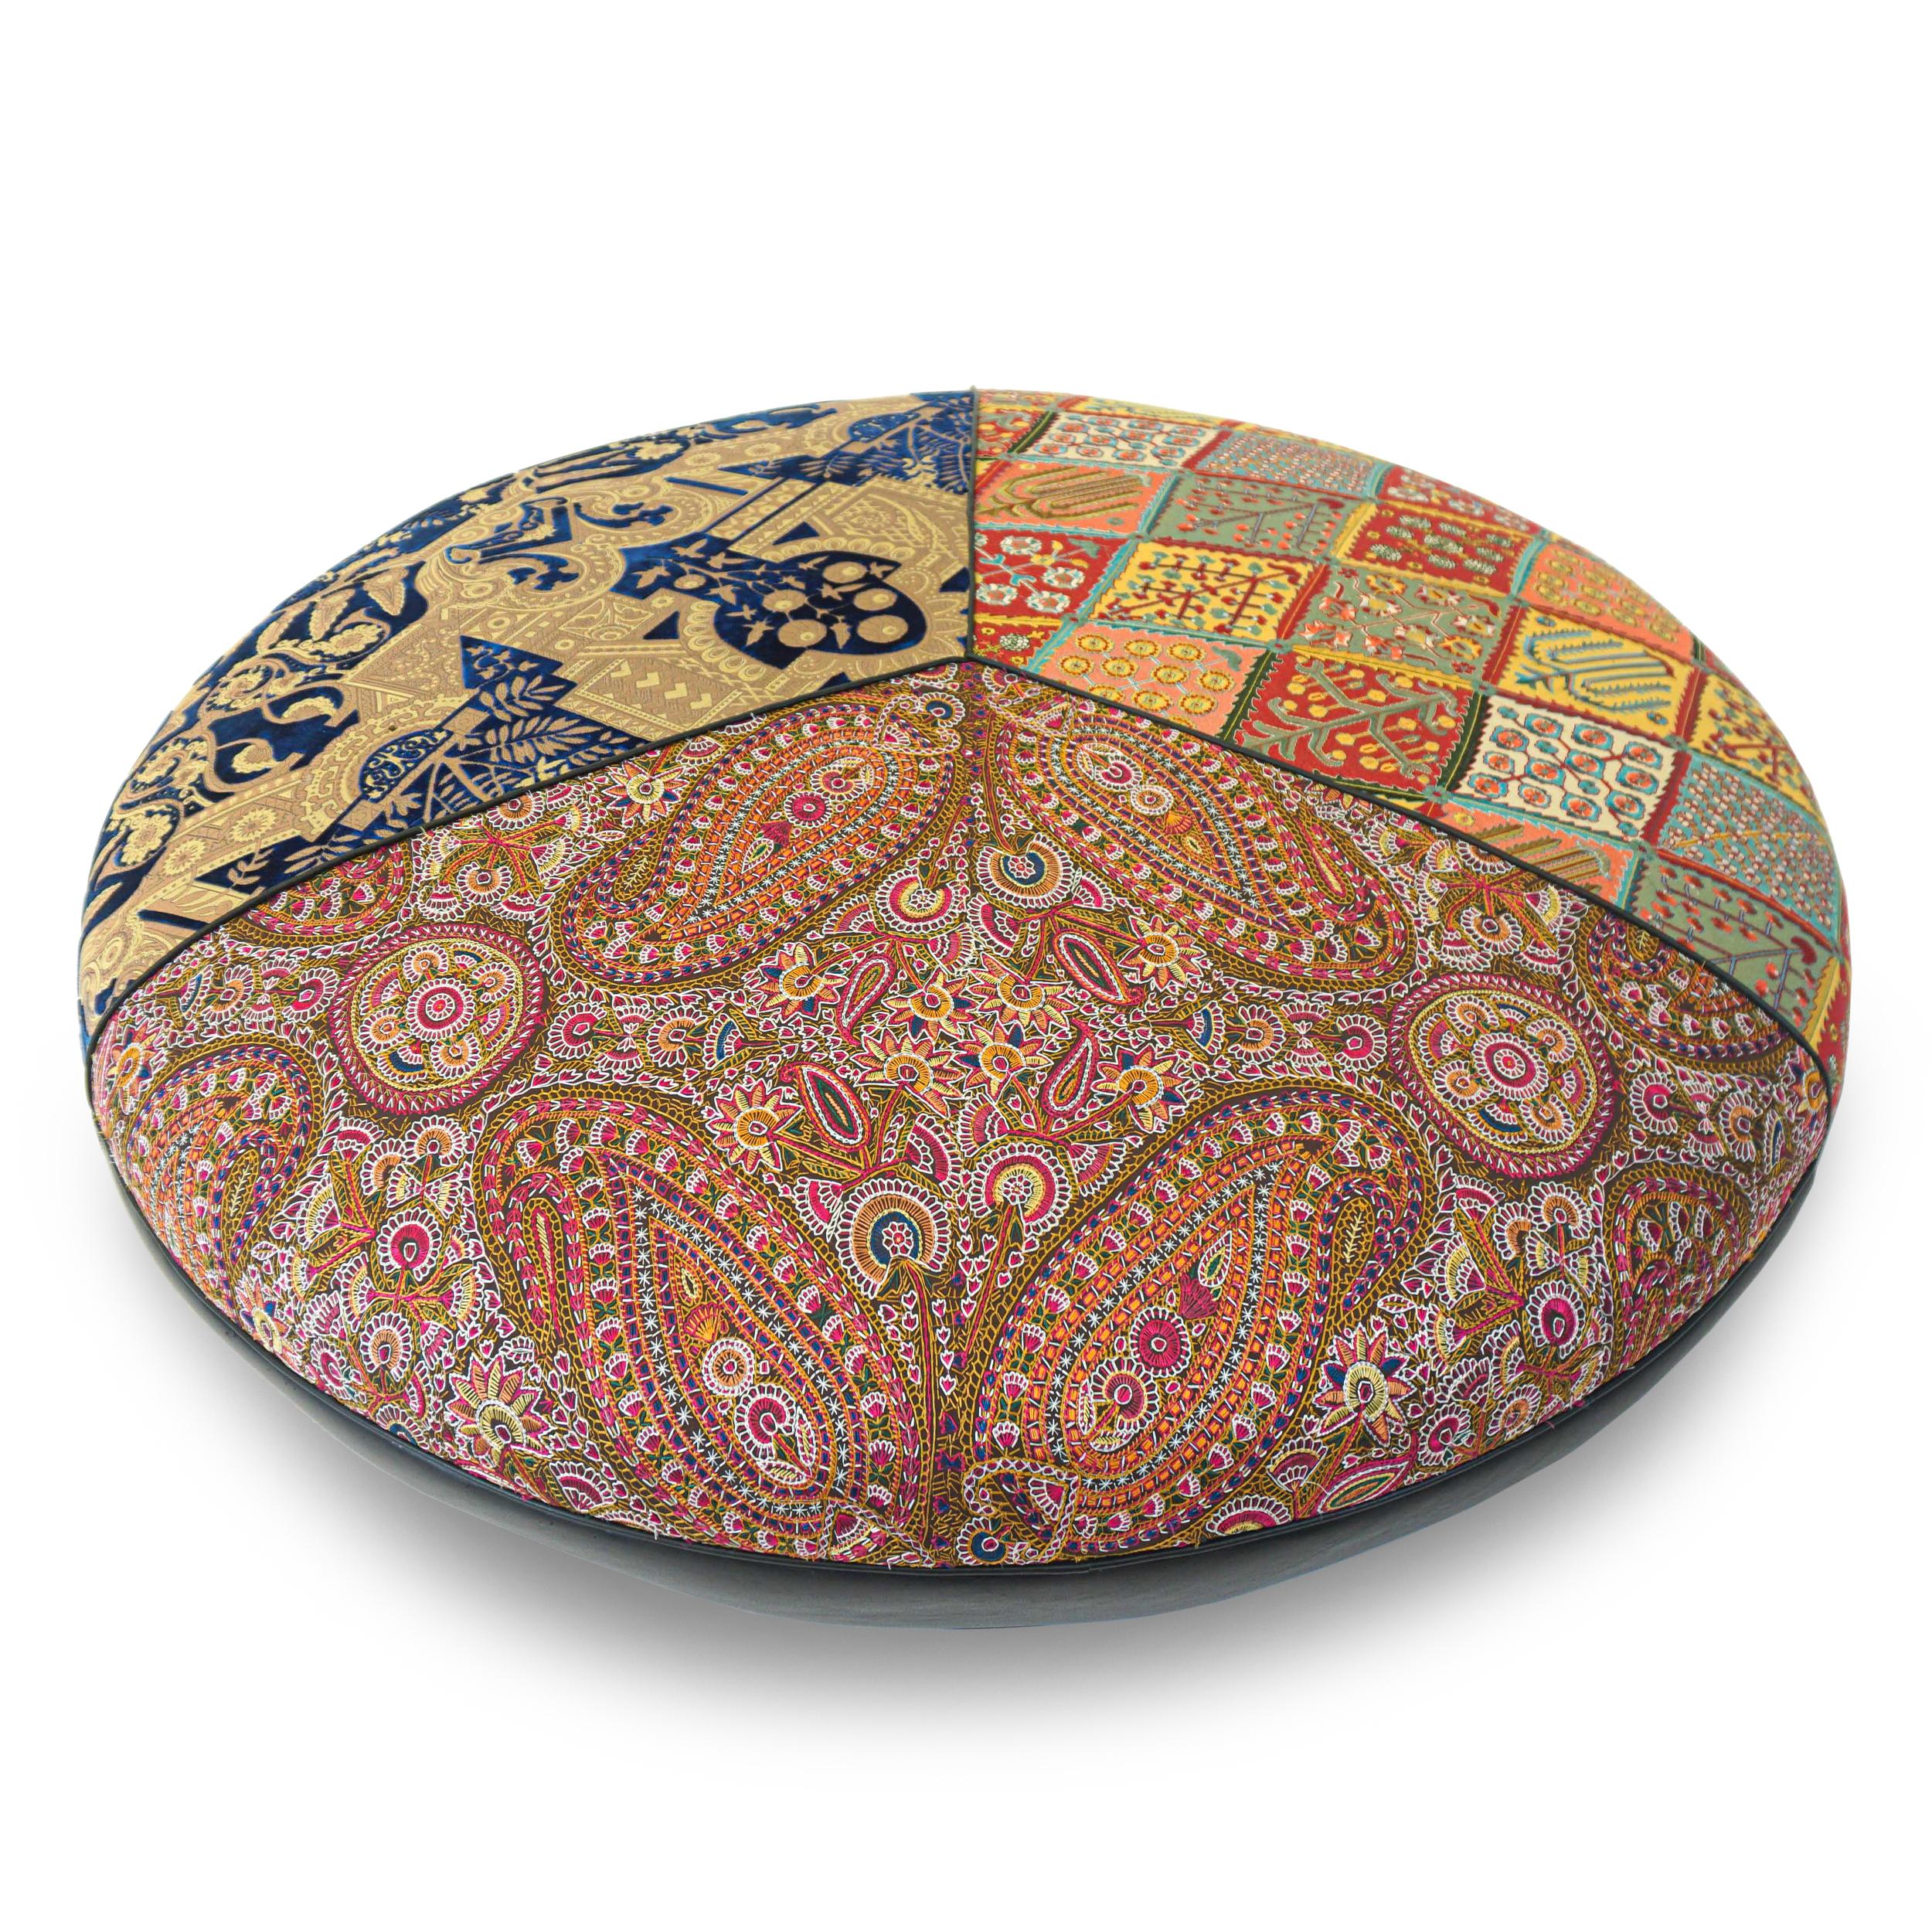 Large Round Upholstered Moroccan-Inspired Ottoman, Customizable For Sale 4